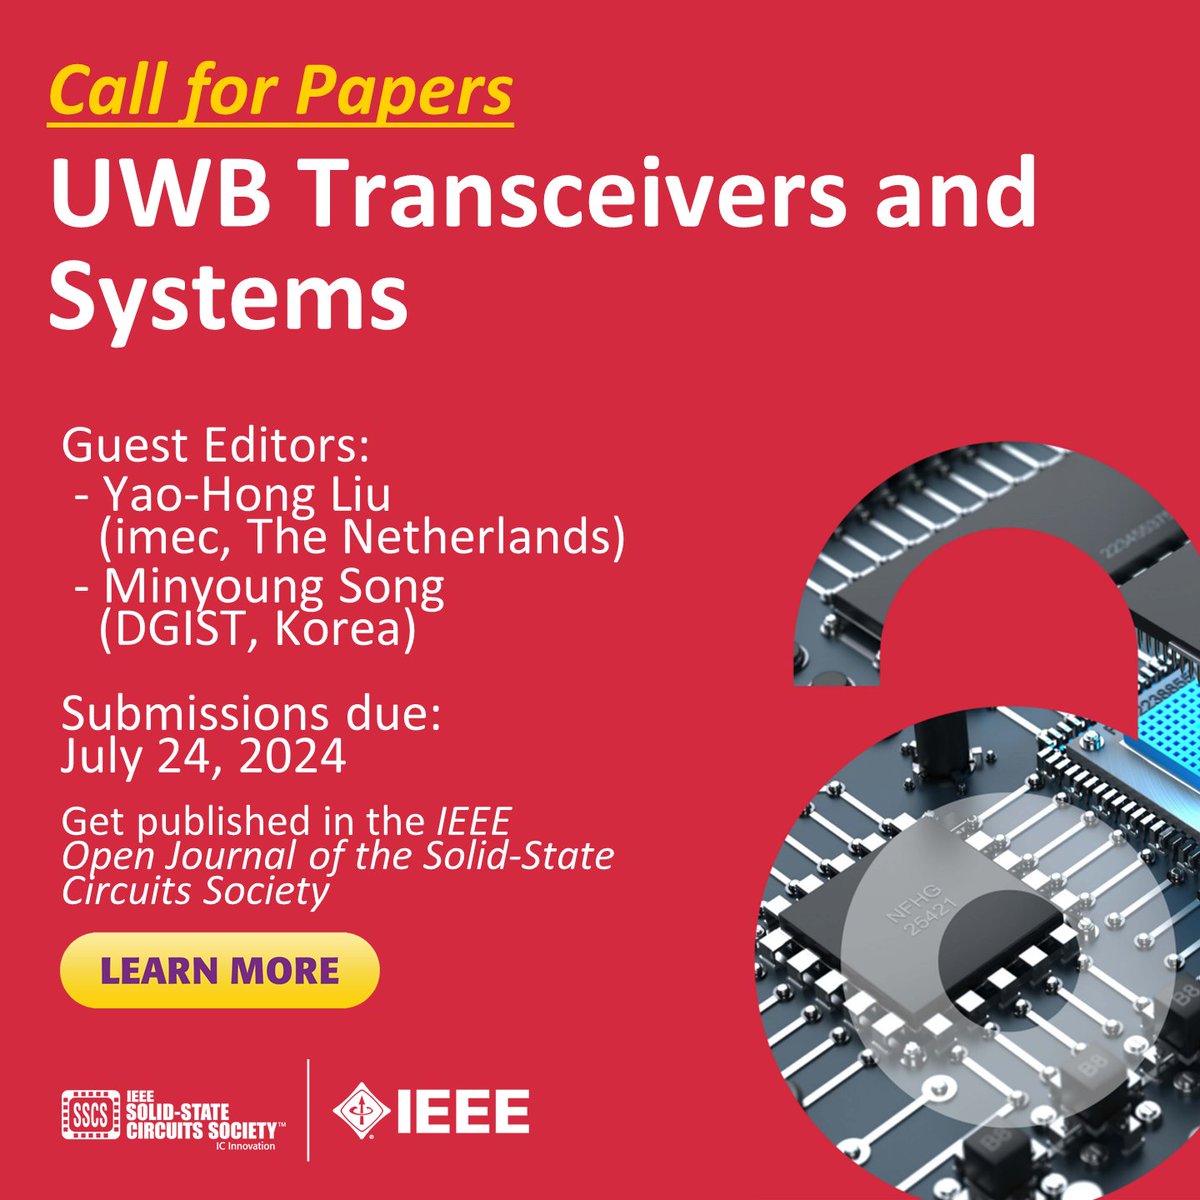 Dive into the realm of UWB Transceivers and Systems with the Open Journal of the Solid-State Circuits Society! Submit your papers for our special issue. Submissions open May 1st! Find more info here: bit.ly/43WG7iZ #CallForPapers #UWBTransceivers #IEEE